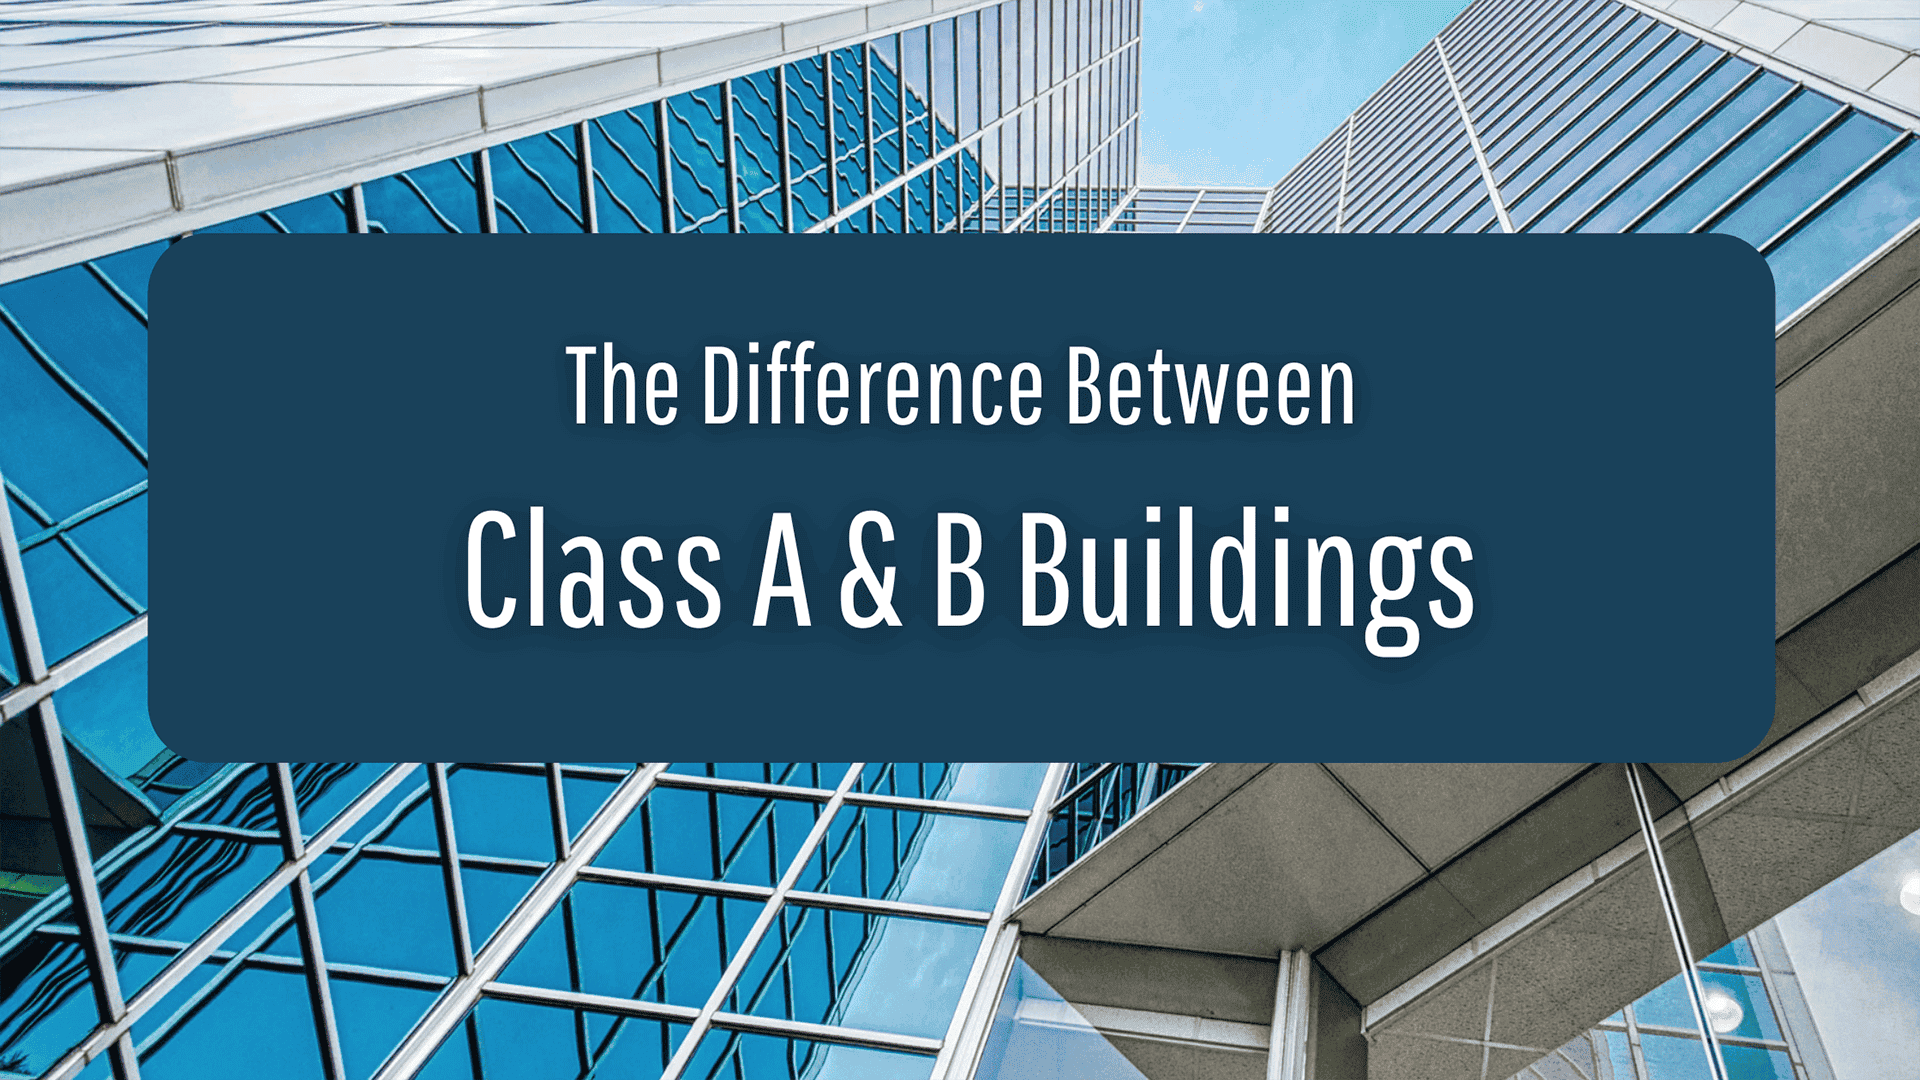 Class B Building vs. Class A: What's the Difference?